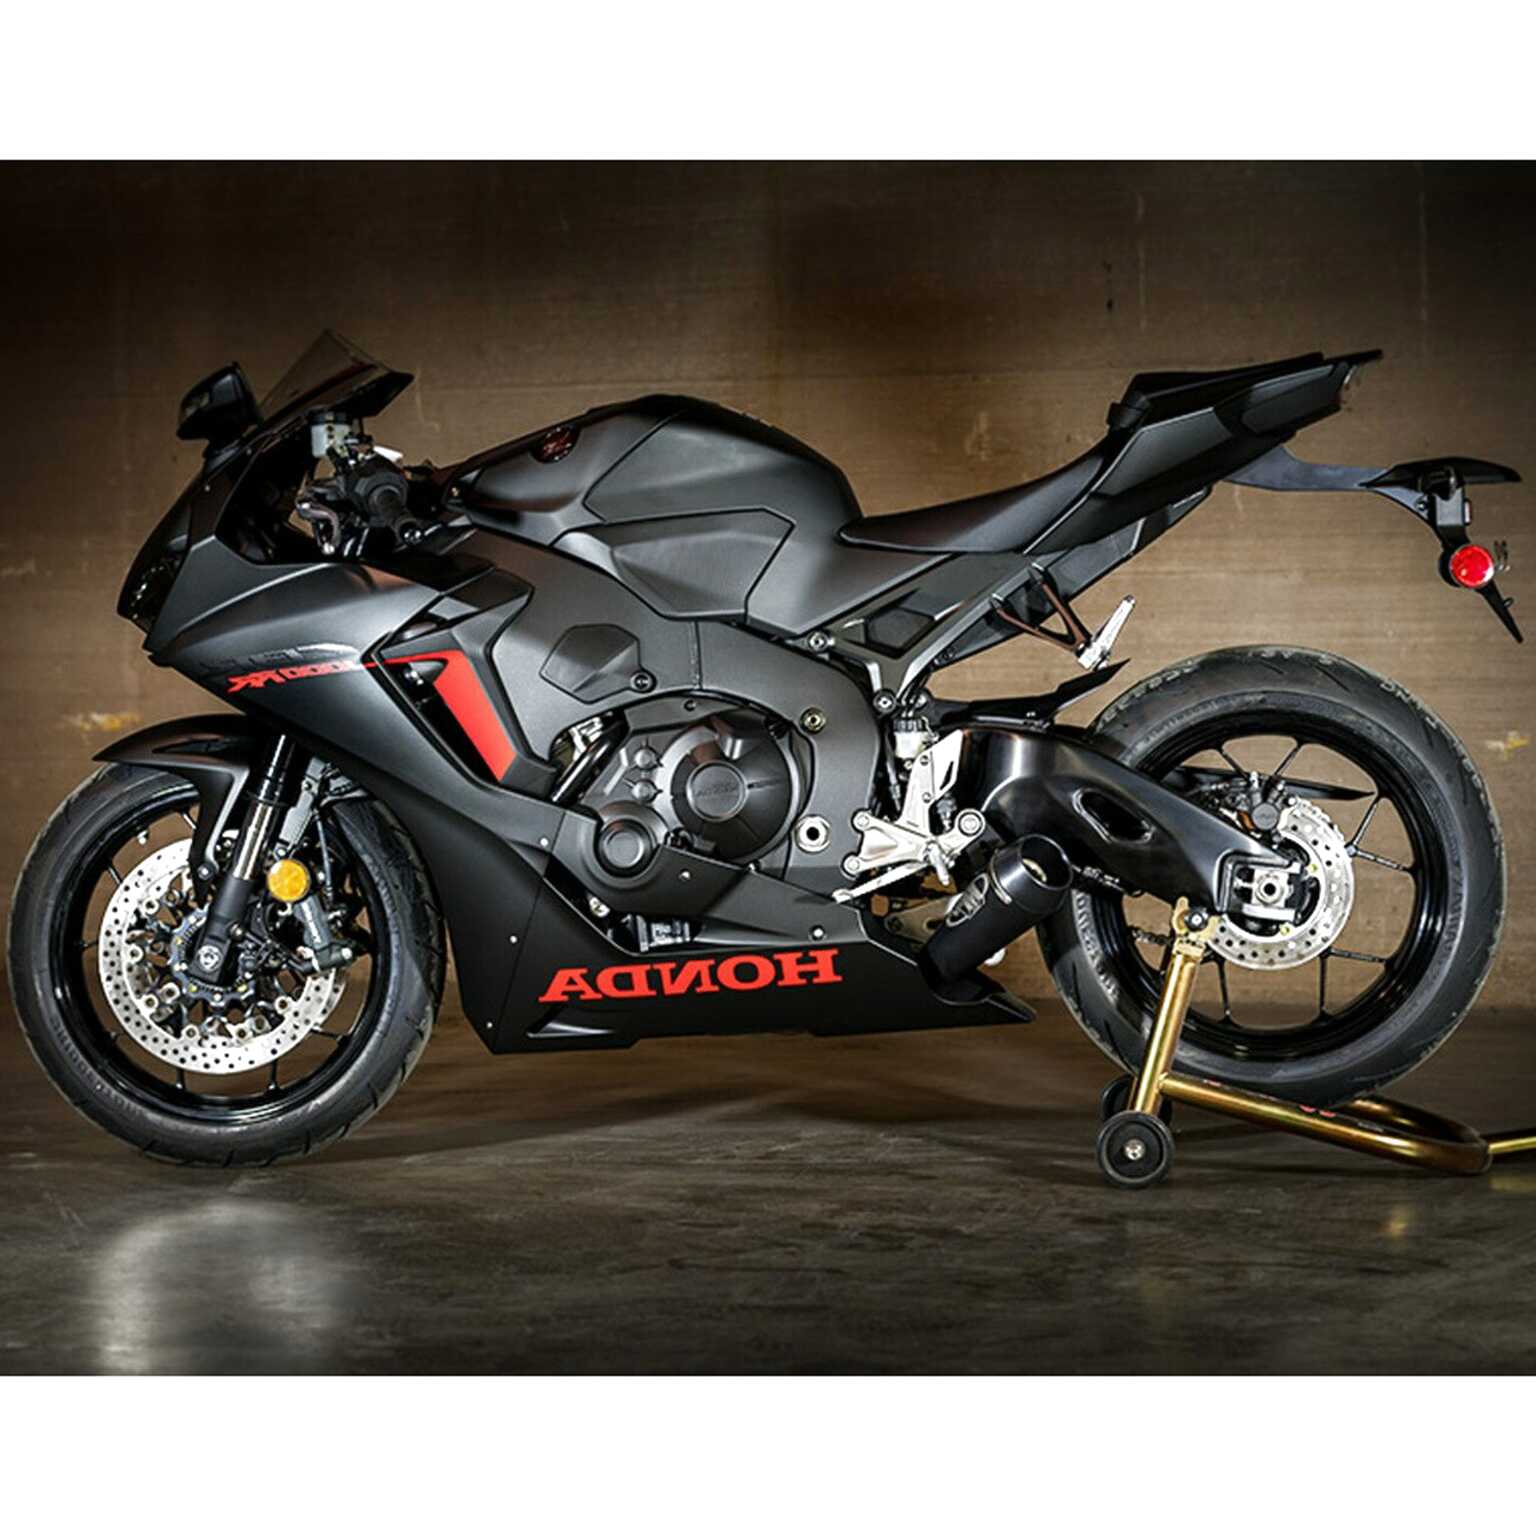 Cbr1000rr Exhaust for sale in UK | 71 used Cbr1000rr Exhausts